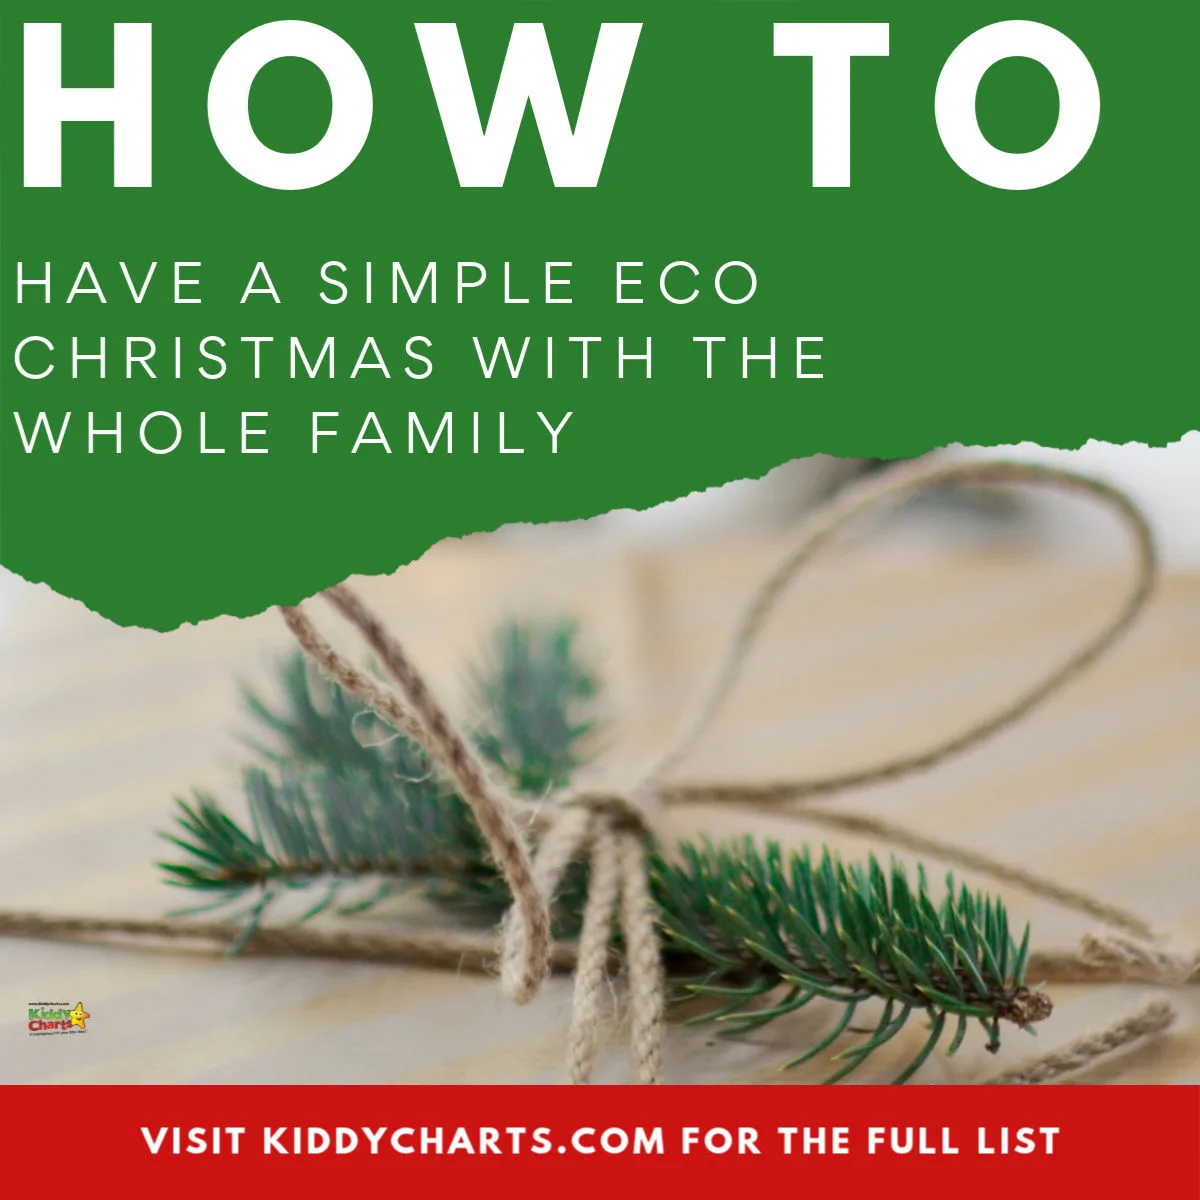 Here's how to have a simple eco Christmas - Variety of Christmas wrapped presents.